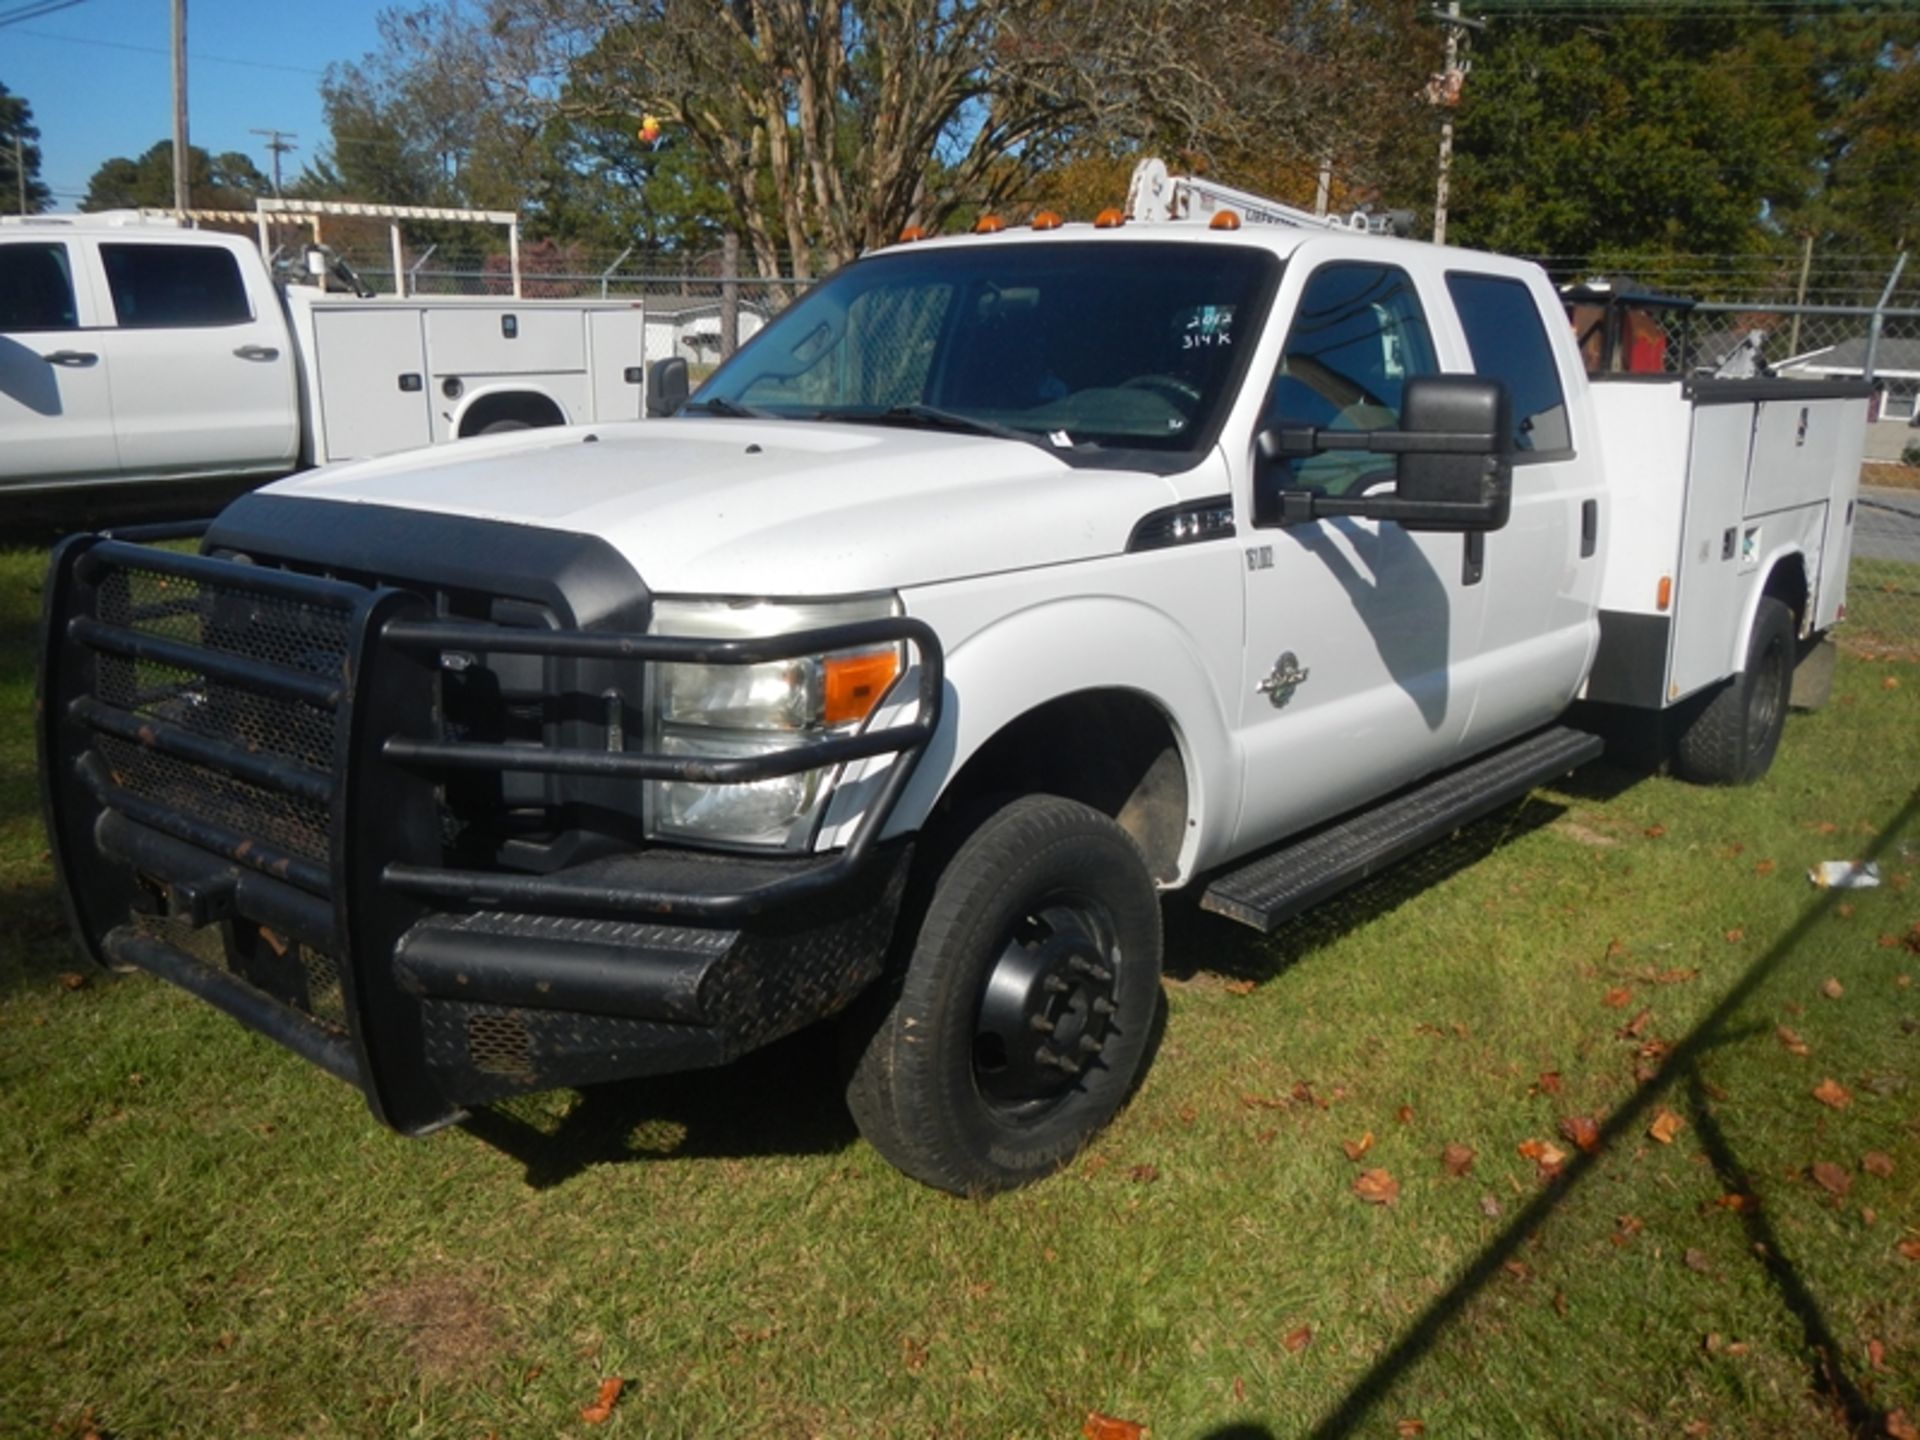 2012 FORD F-350 6.7L dsl, crew cab, 4wd, utility body with crane and air compressor - 314,136